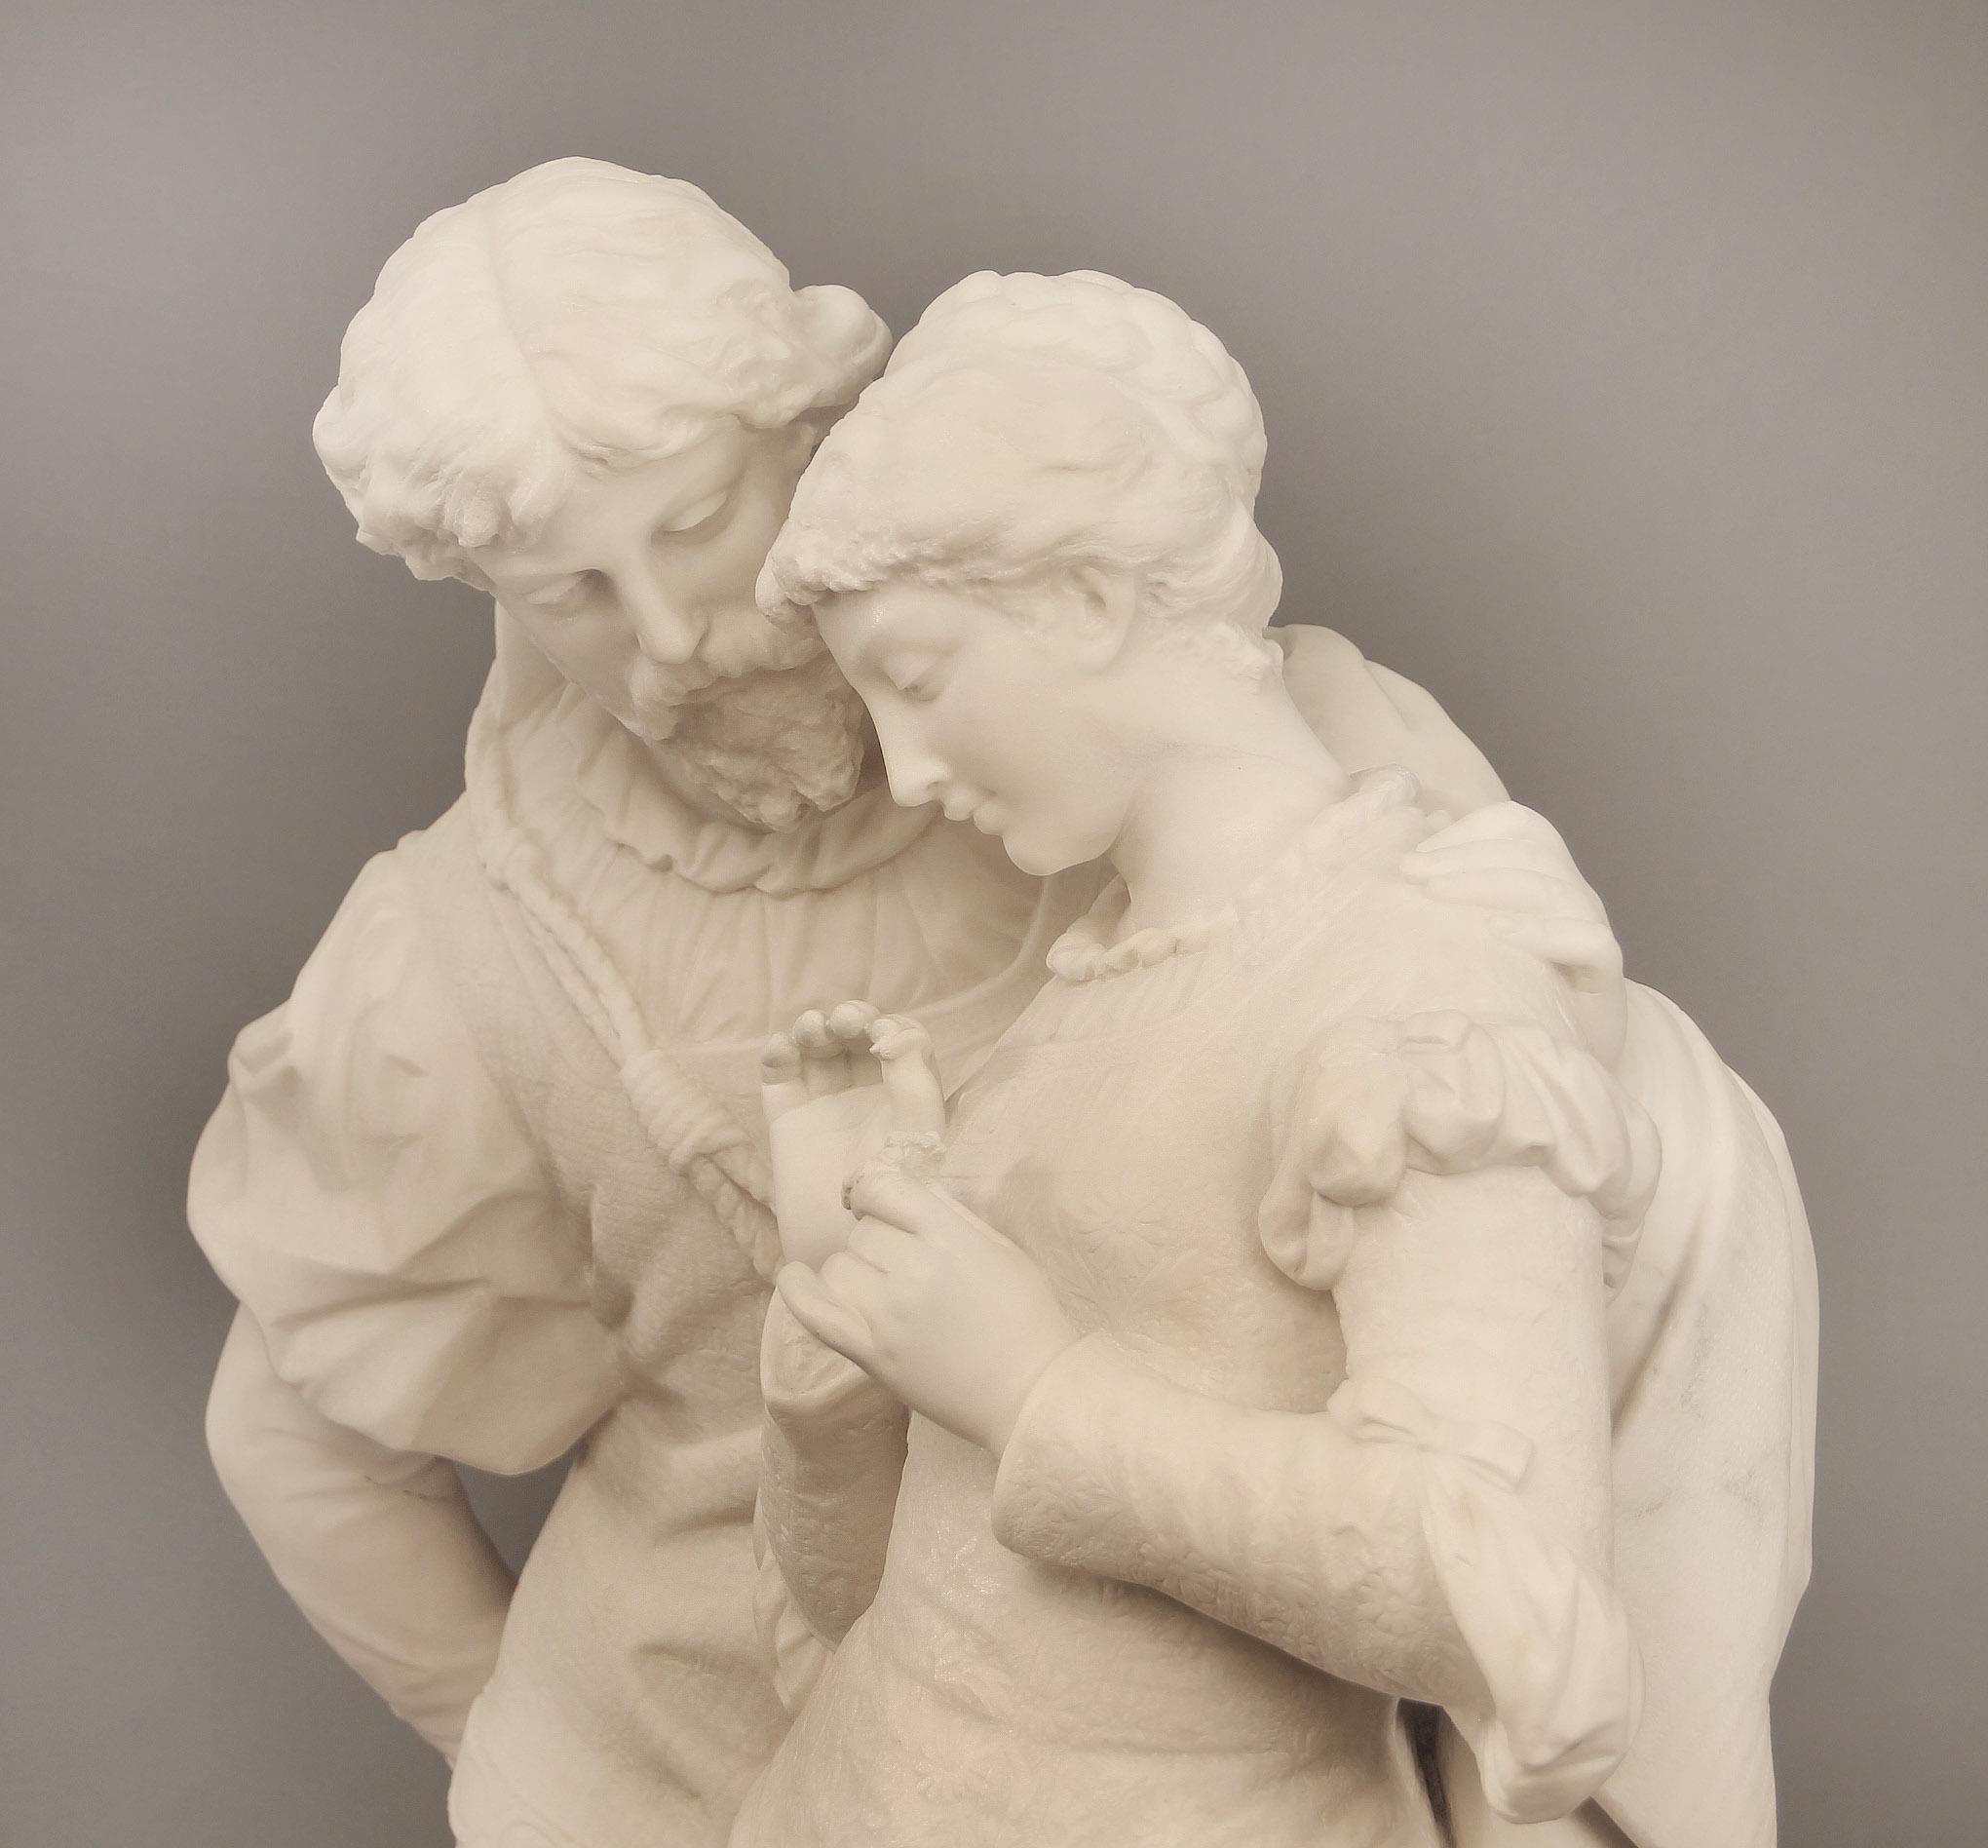 Hand-Carved 19th Century Italian White Carrara Marble, “Paolo and Francesca” by Romanelli For Sale